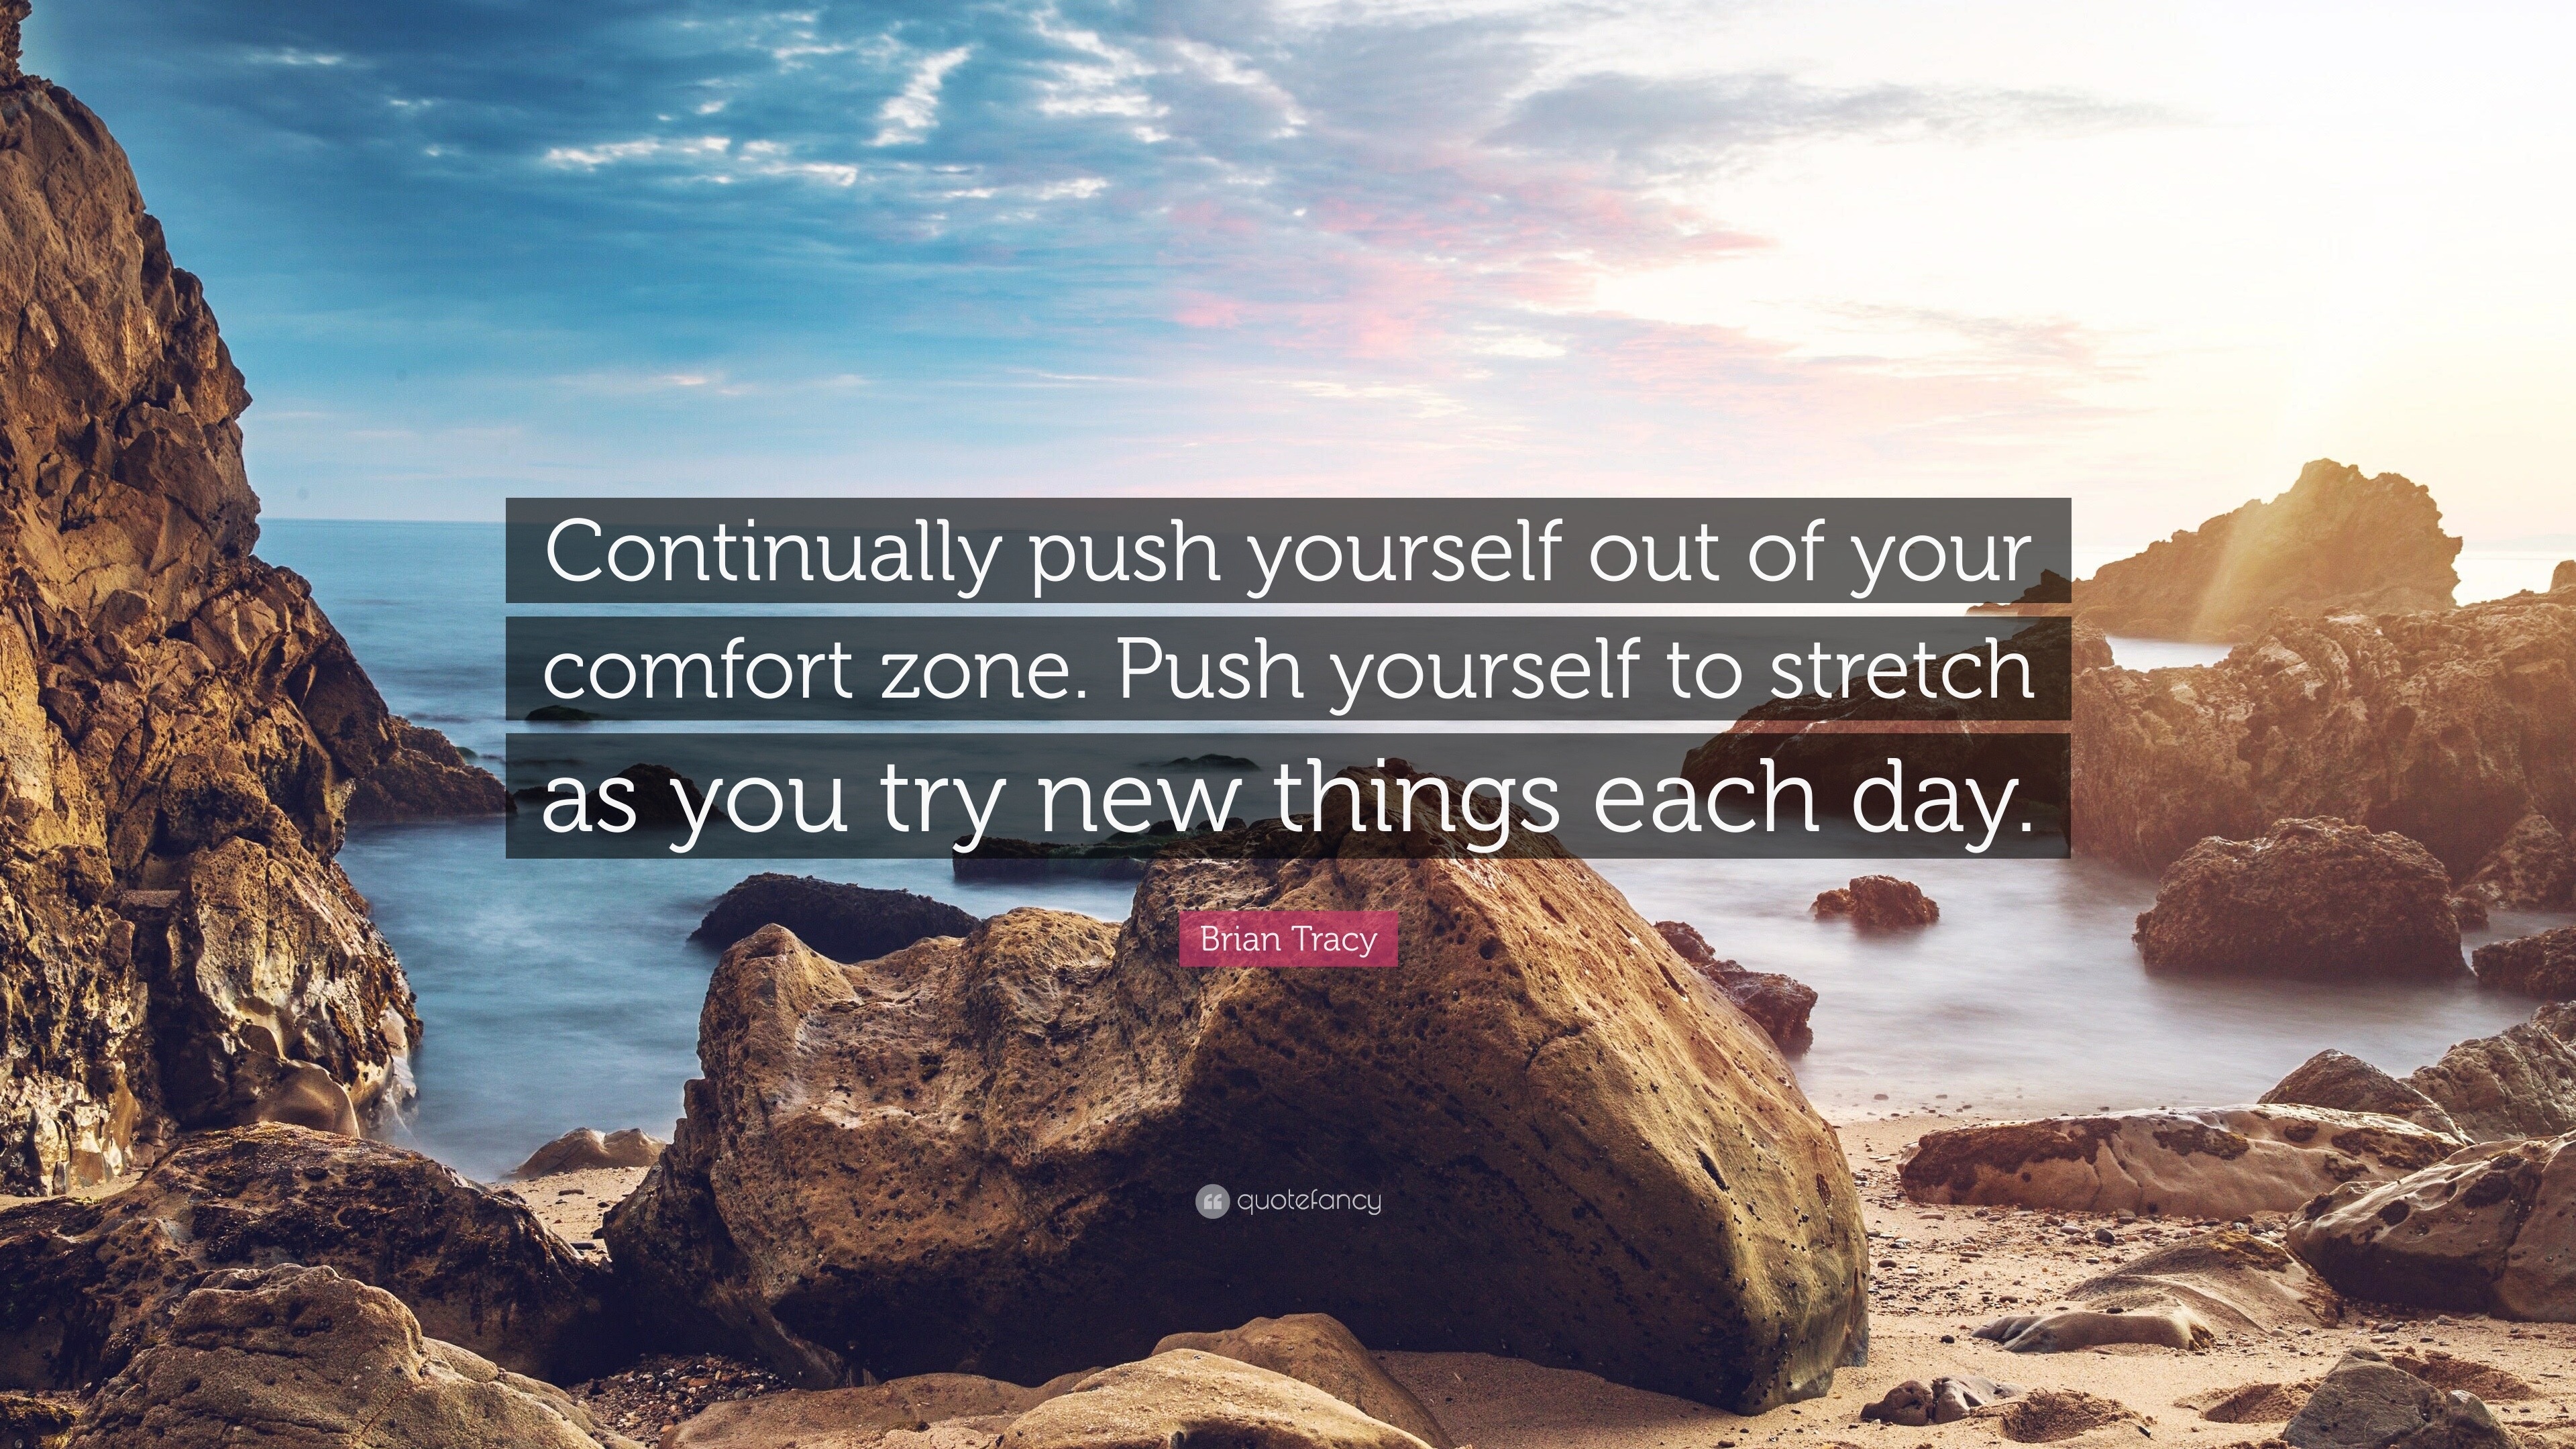 Brian Tracy Quote: “Continually push yourself out of your comfort